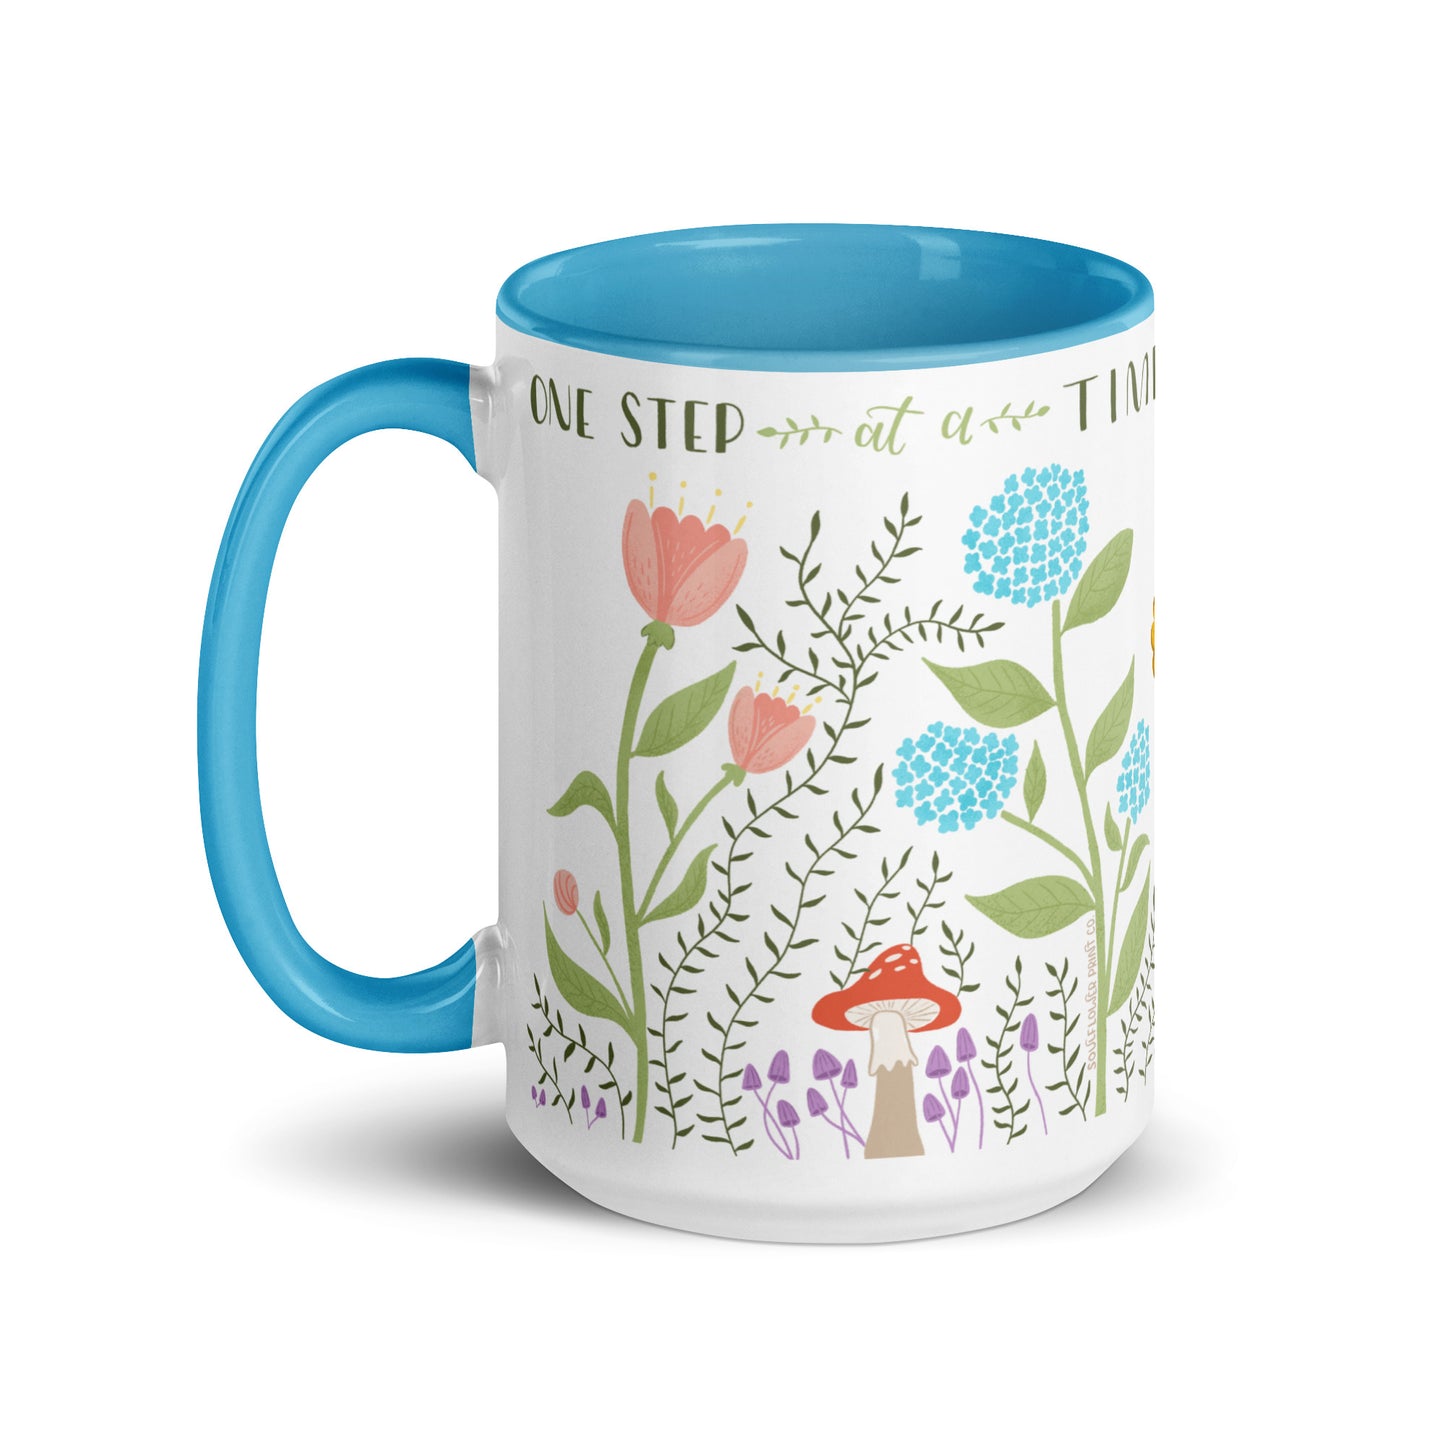 Ceramic Mug with Blue Accent | One Step at a Time | Dreamy Botanical Collection